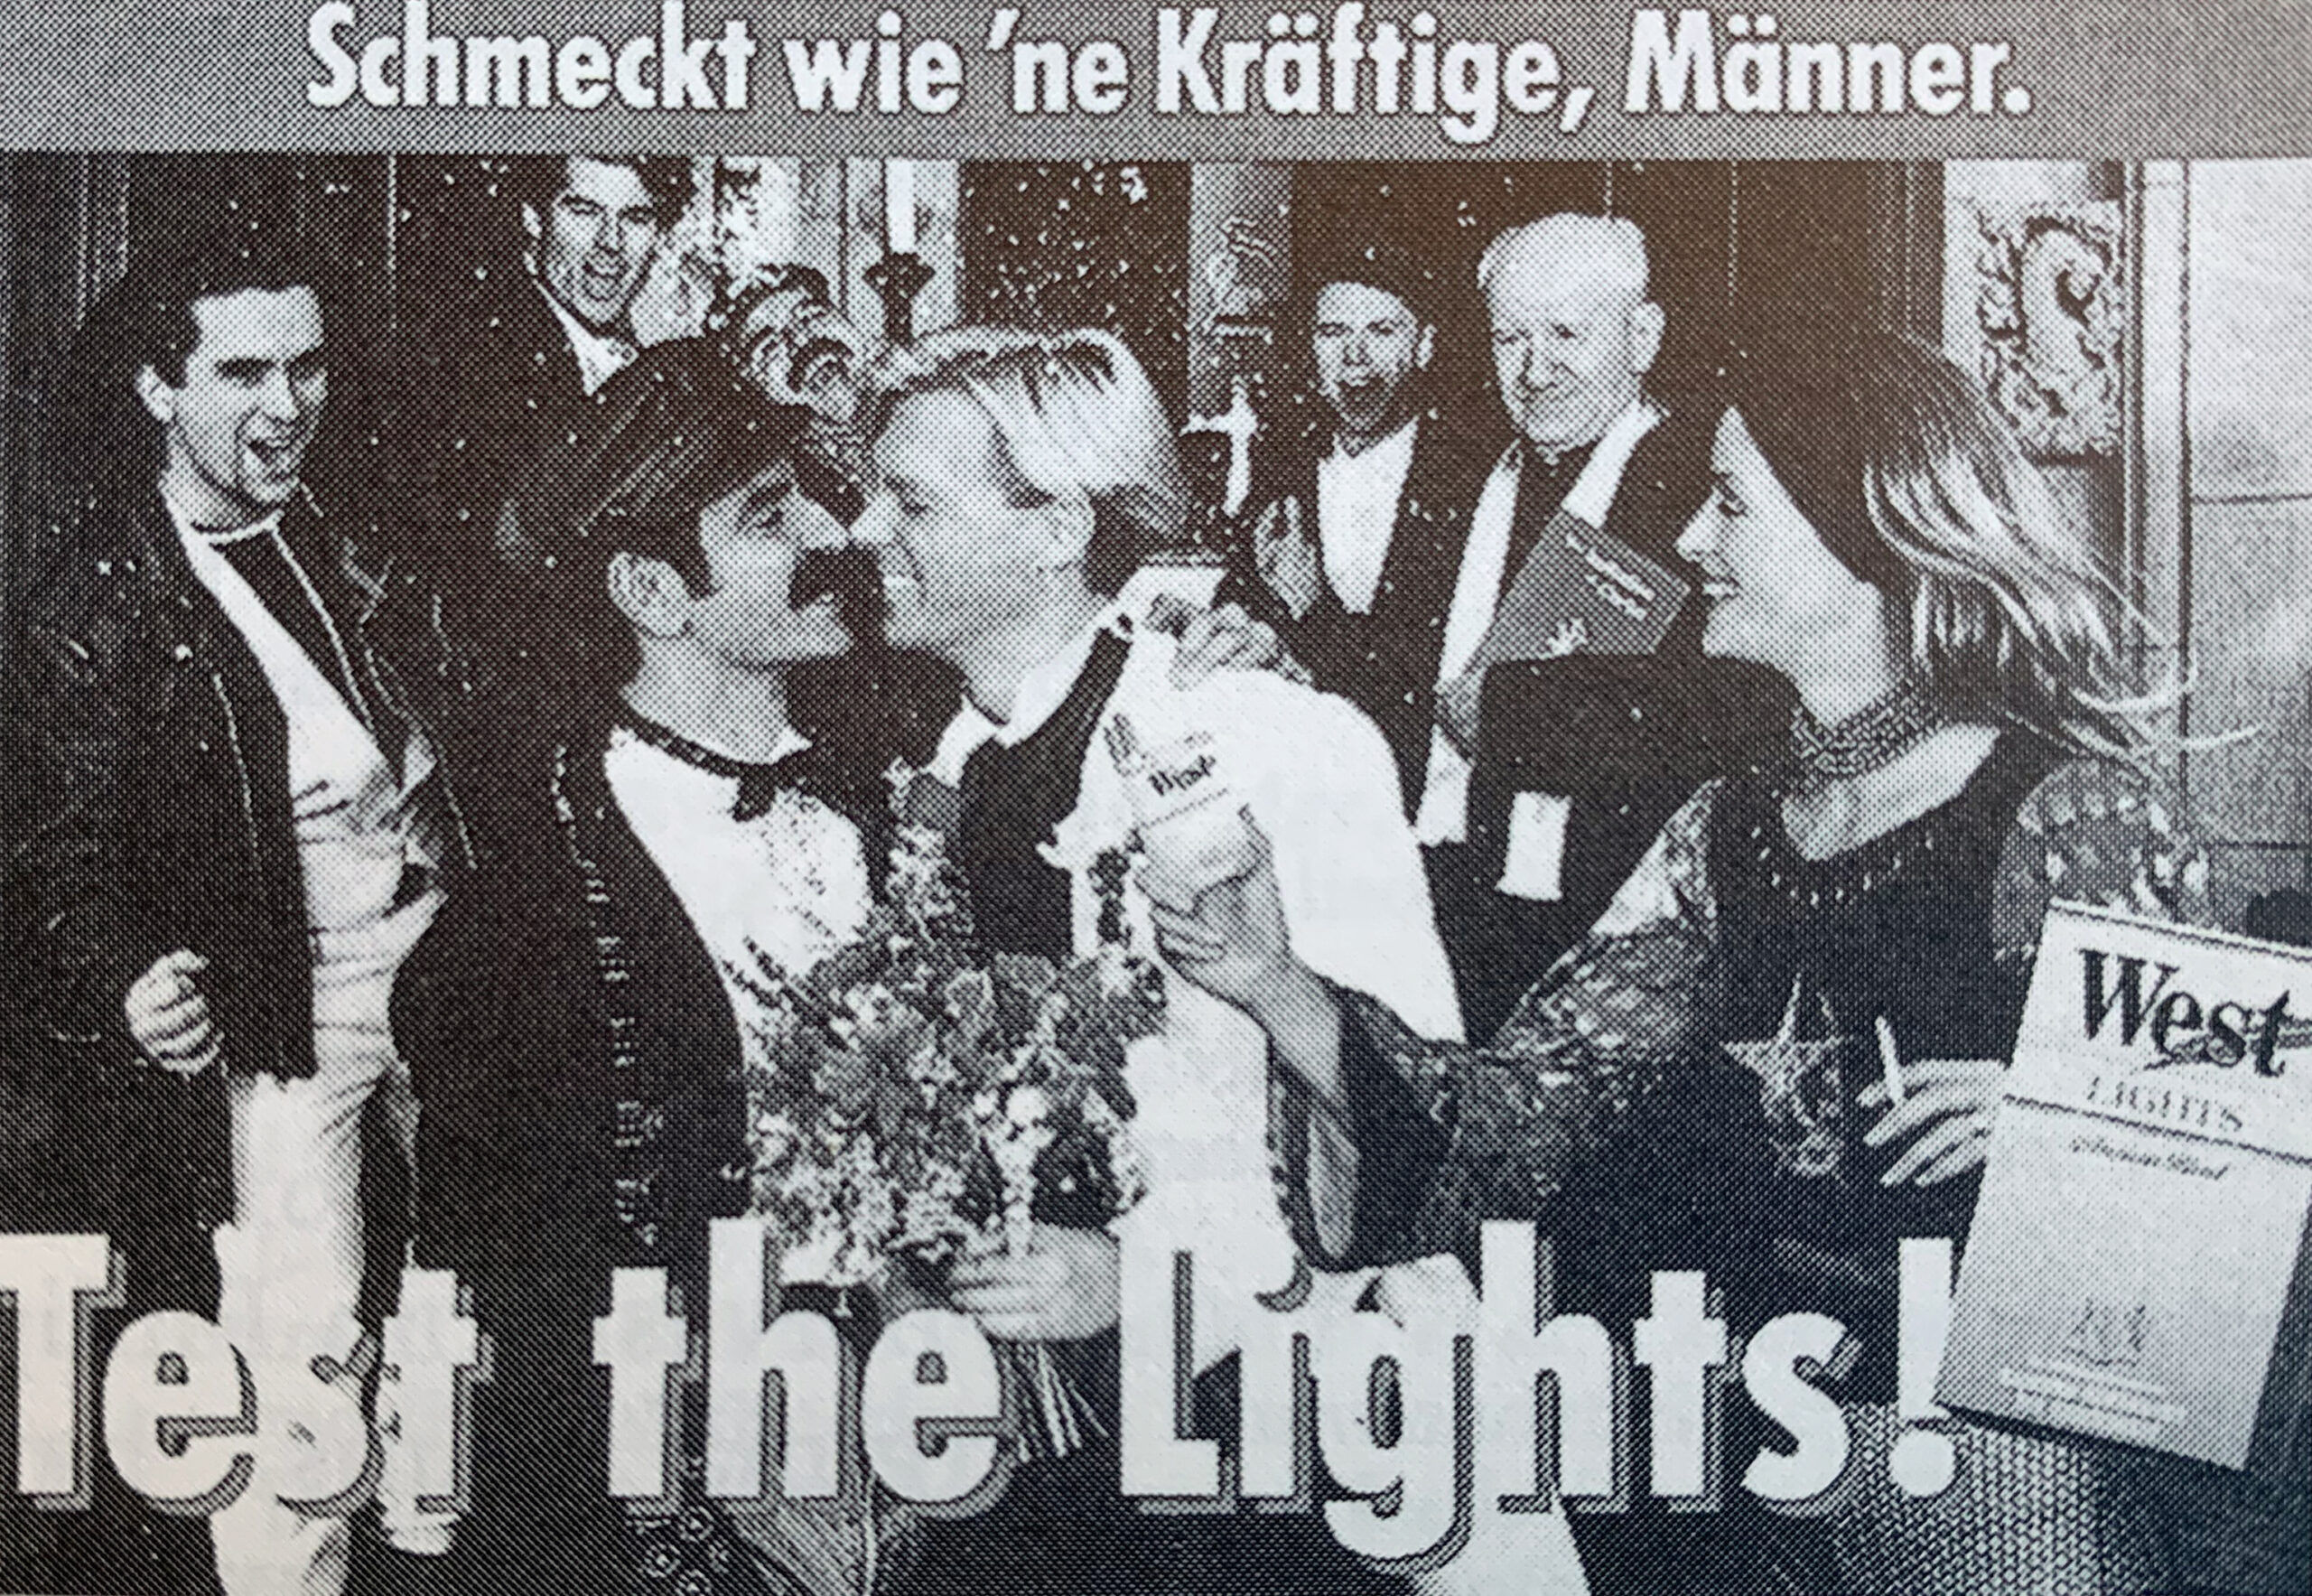 German cigarette ad from the early 1990s with the caption ''Schmeckt wie 'ne Kraftige, Manner. Test the Lights!''